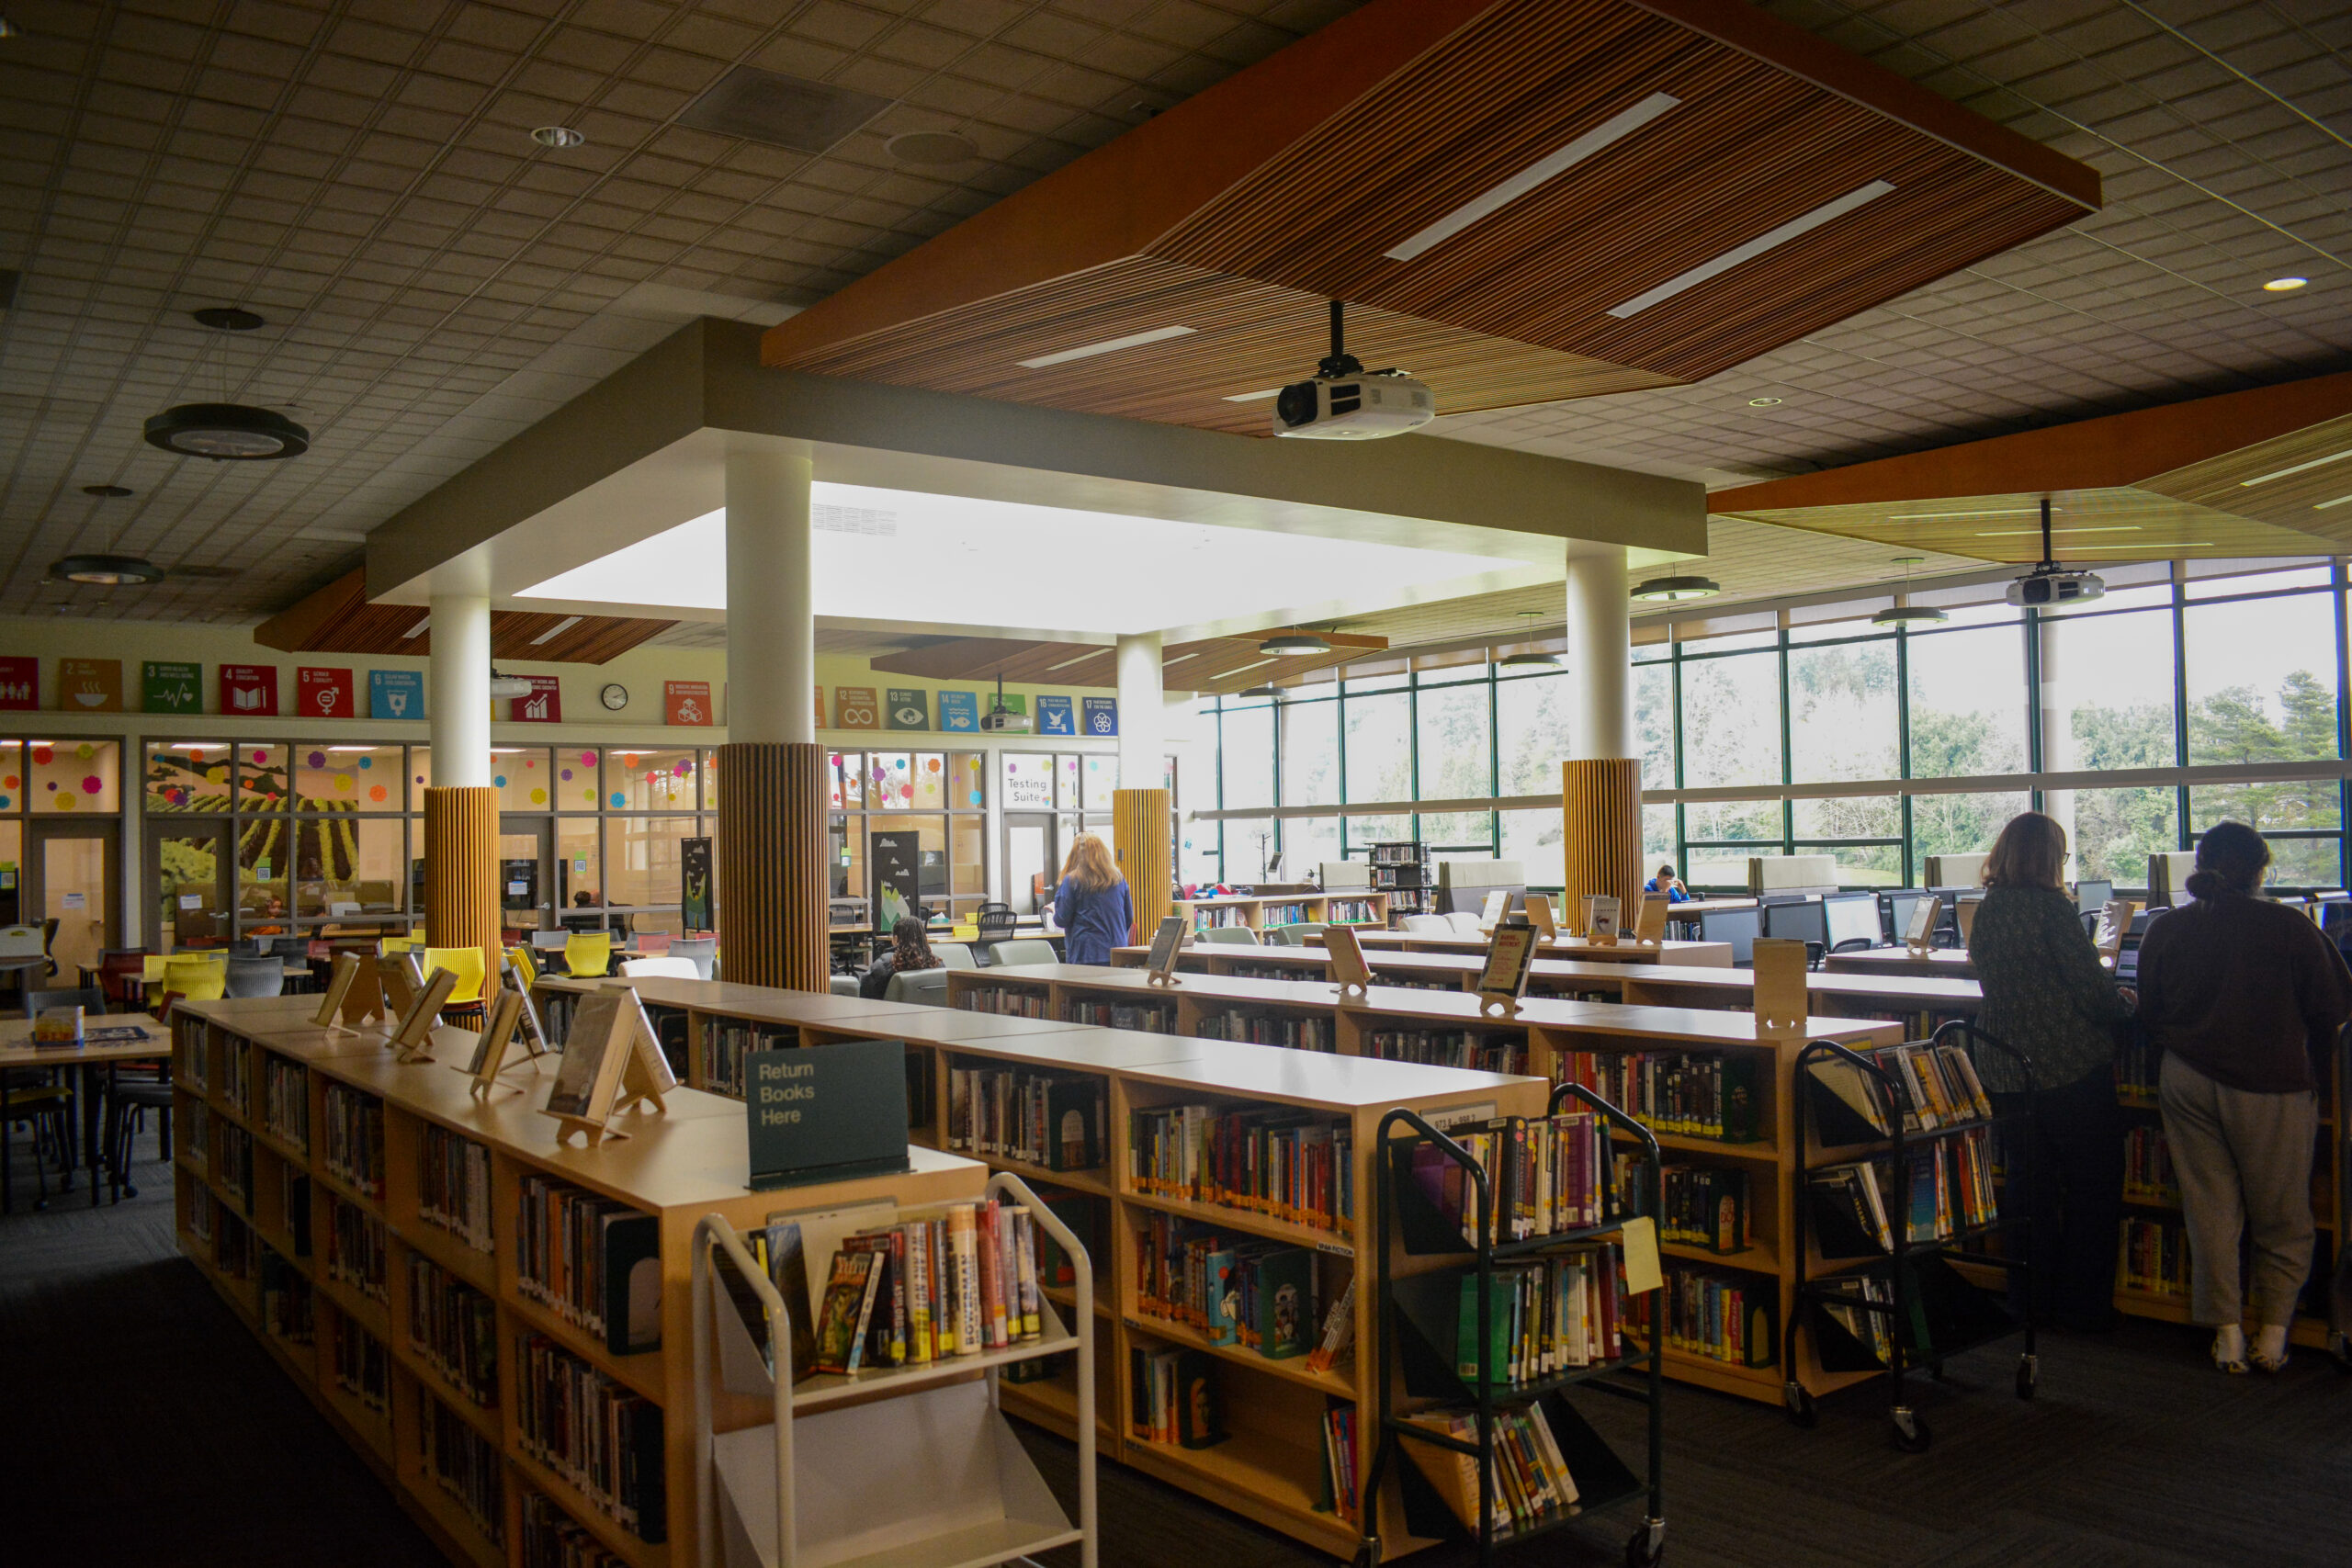 The CLARC library continues its evolution to better serve the needs of students.